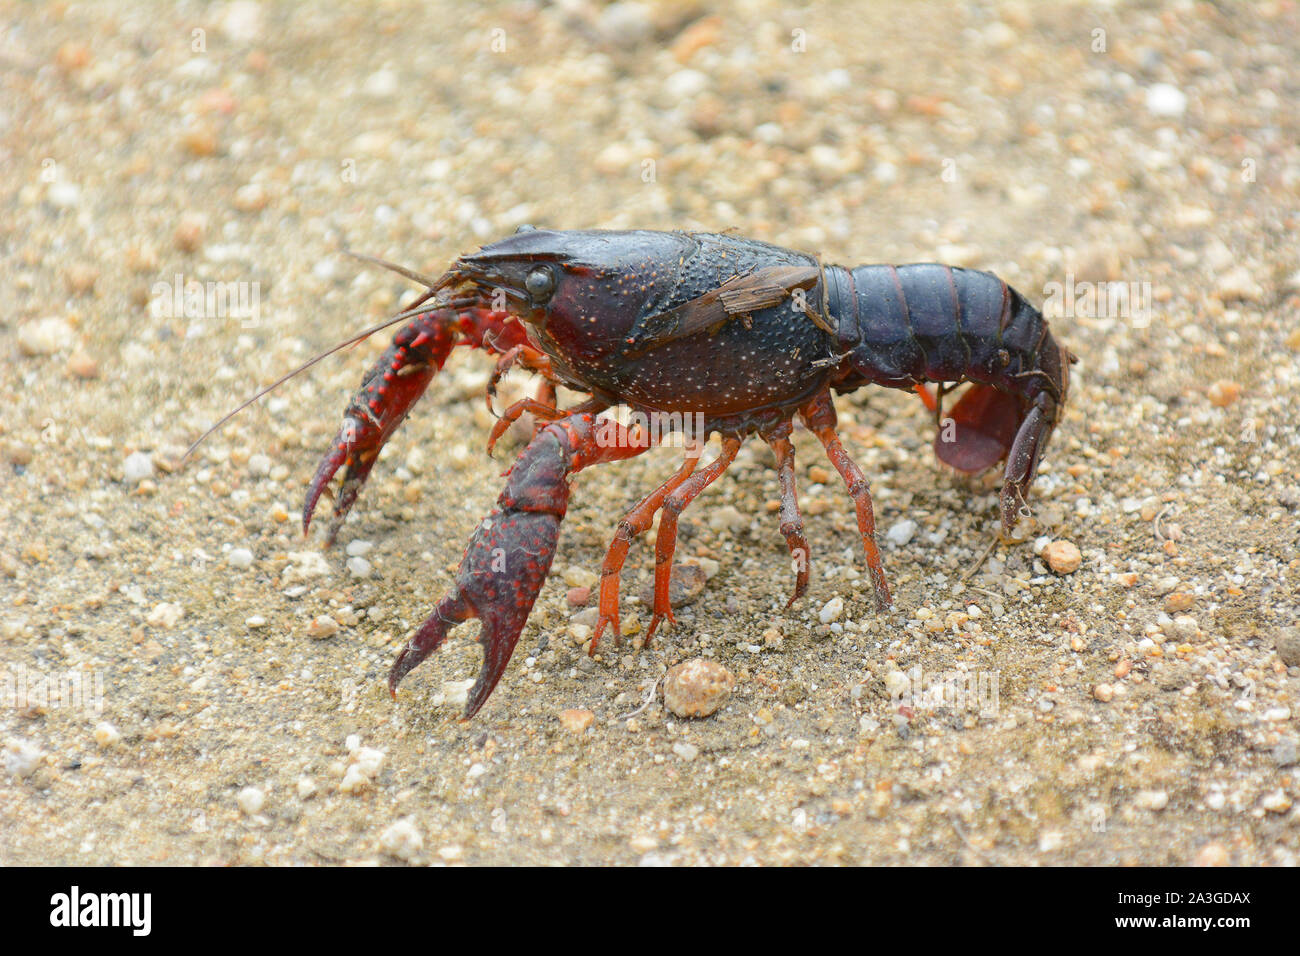 A Red Swamp Crayfish on a sand trail in a marsh. Stock Photo